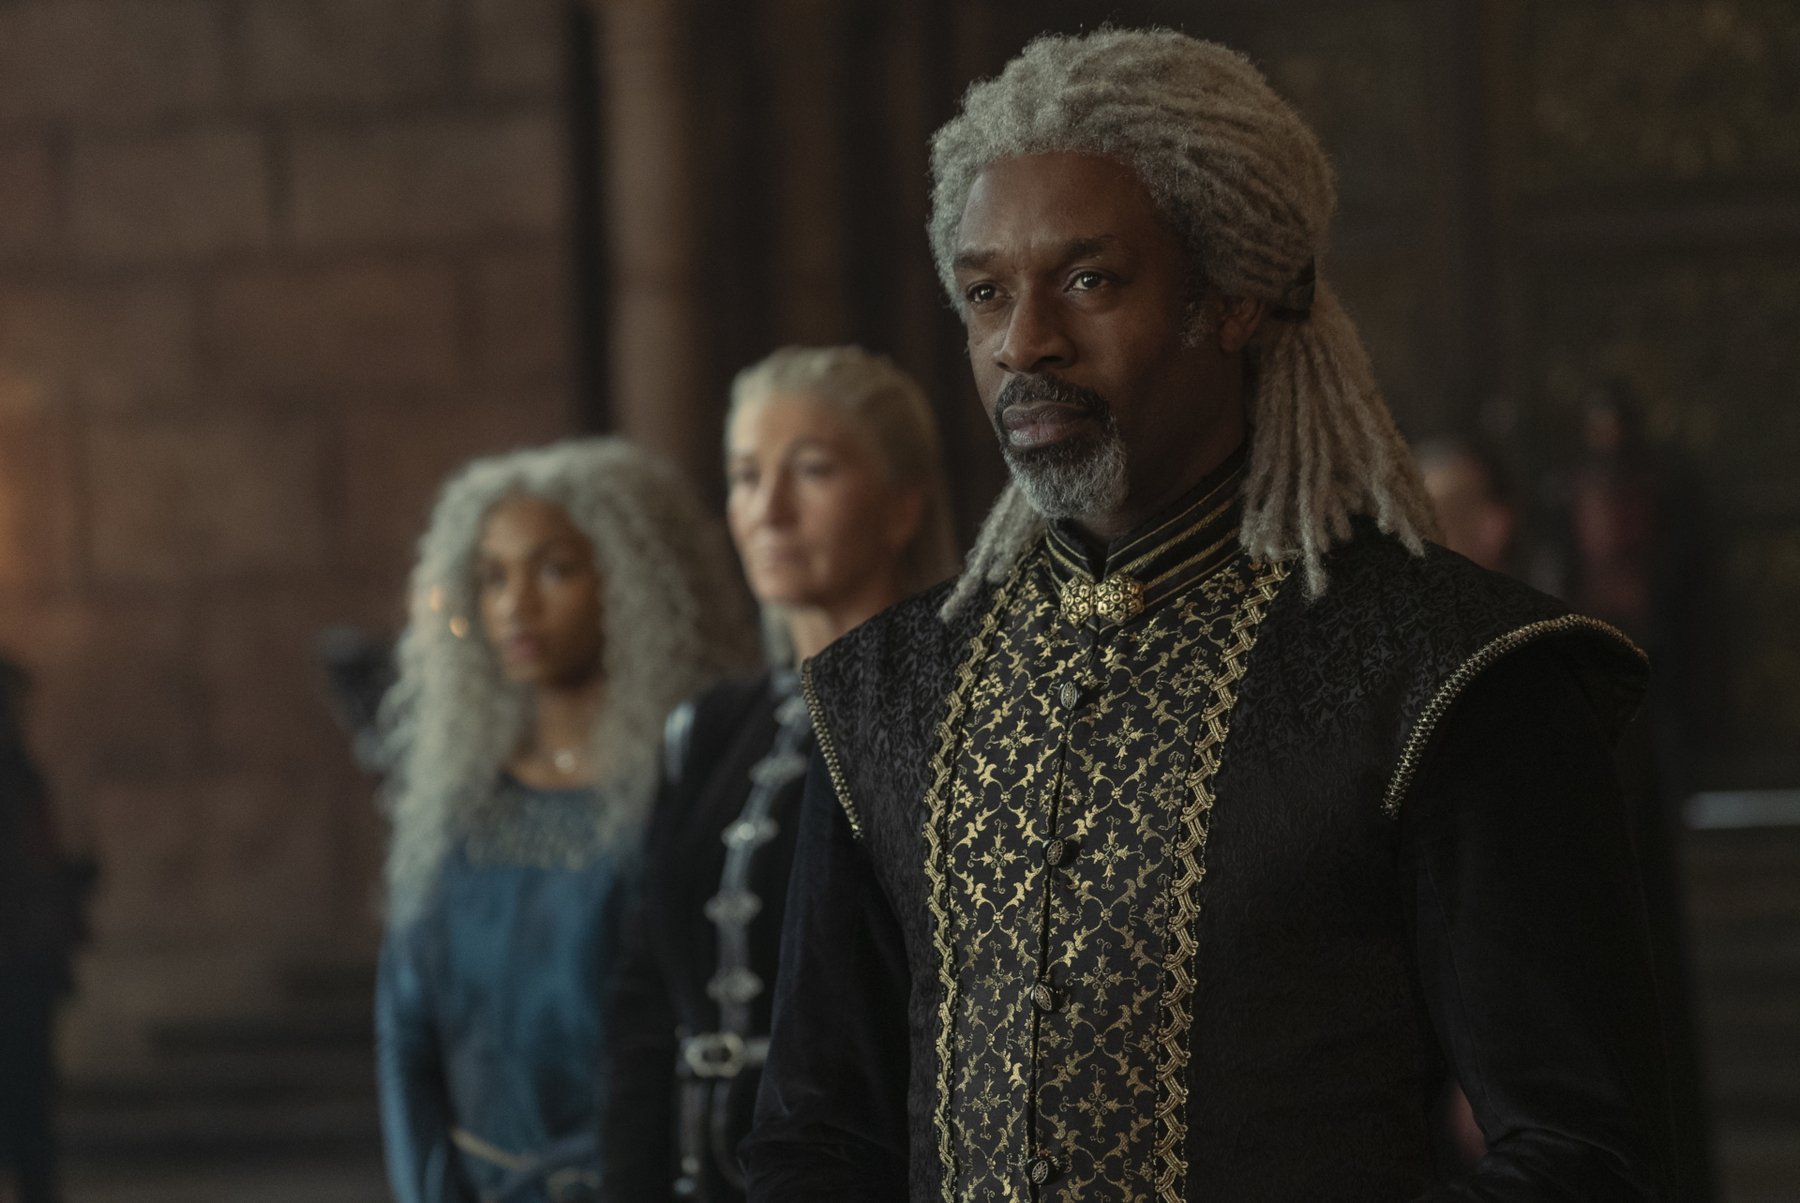 Wil Johnson as Vaemond Velaryon in 'House of the Dragon' Episode 8. He's standing in front of his brother's family and wearing a black vest embroidered with gold.